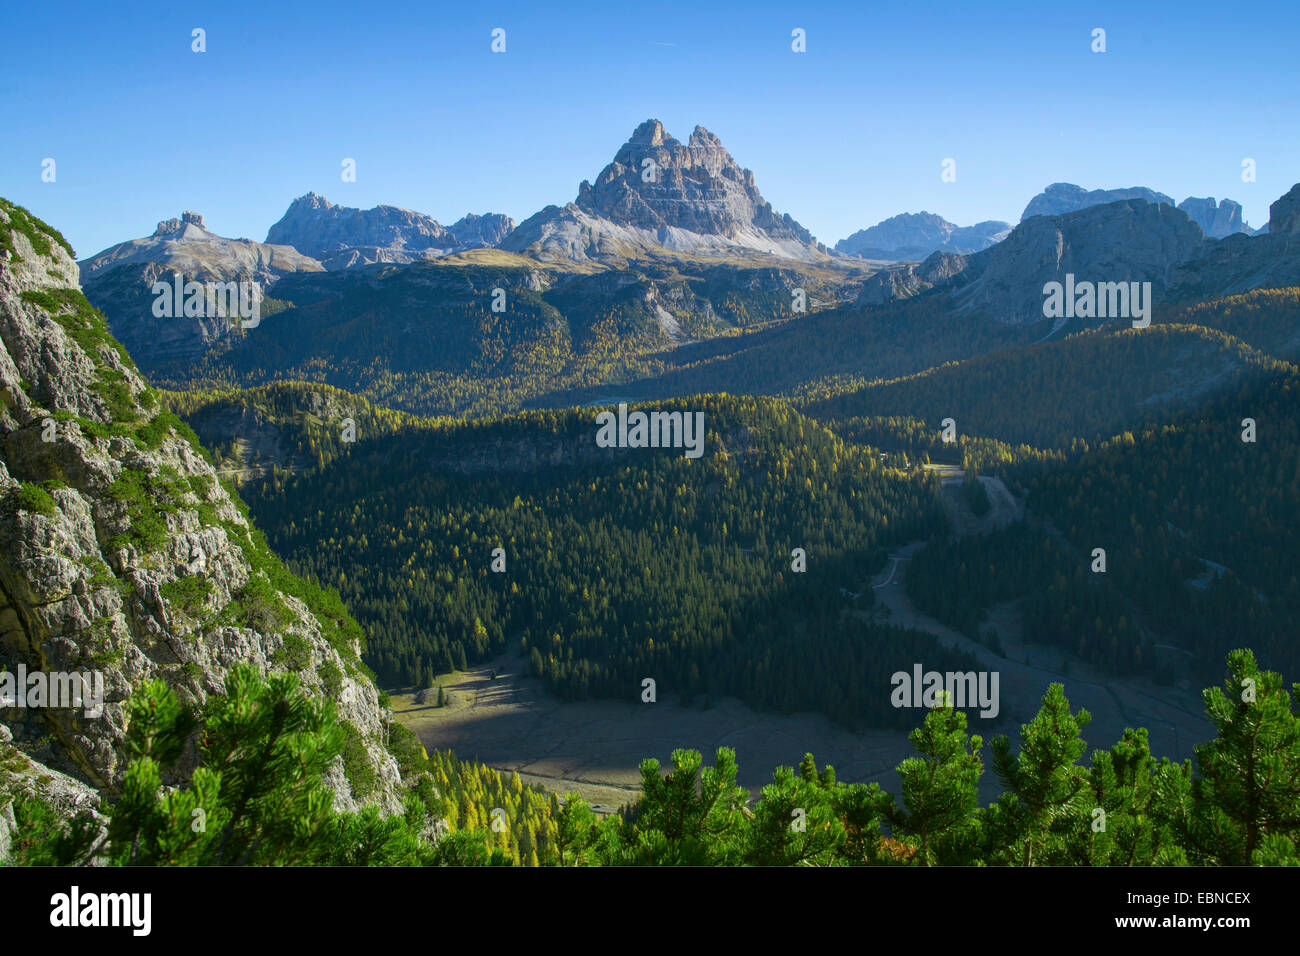 autumn landscape of the Dolomite Alps in morning light, in the center the Tre Cime di Lavaredo group, view from Piz Popena, Italy, South Tyrol, Dolomiten Stock Photo